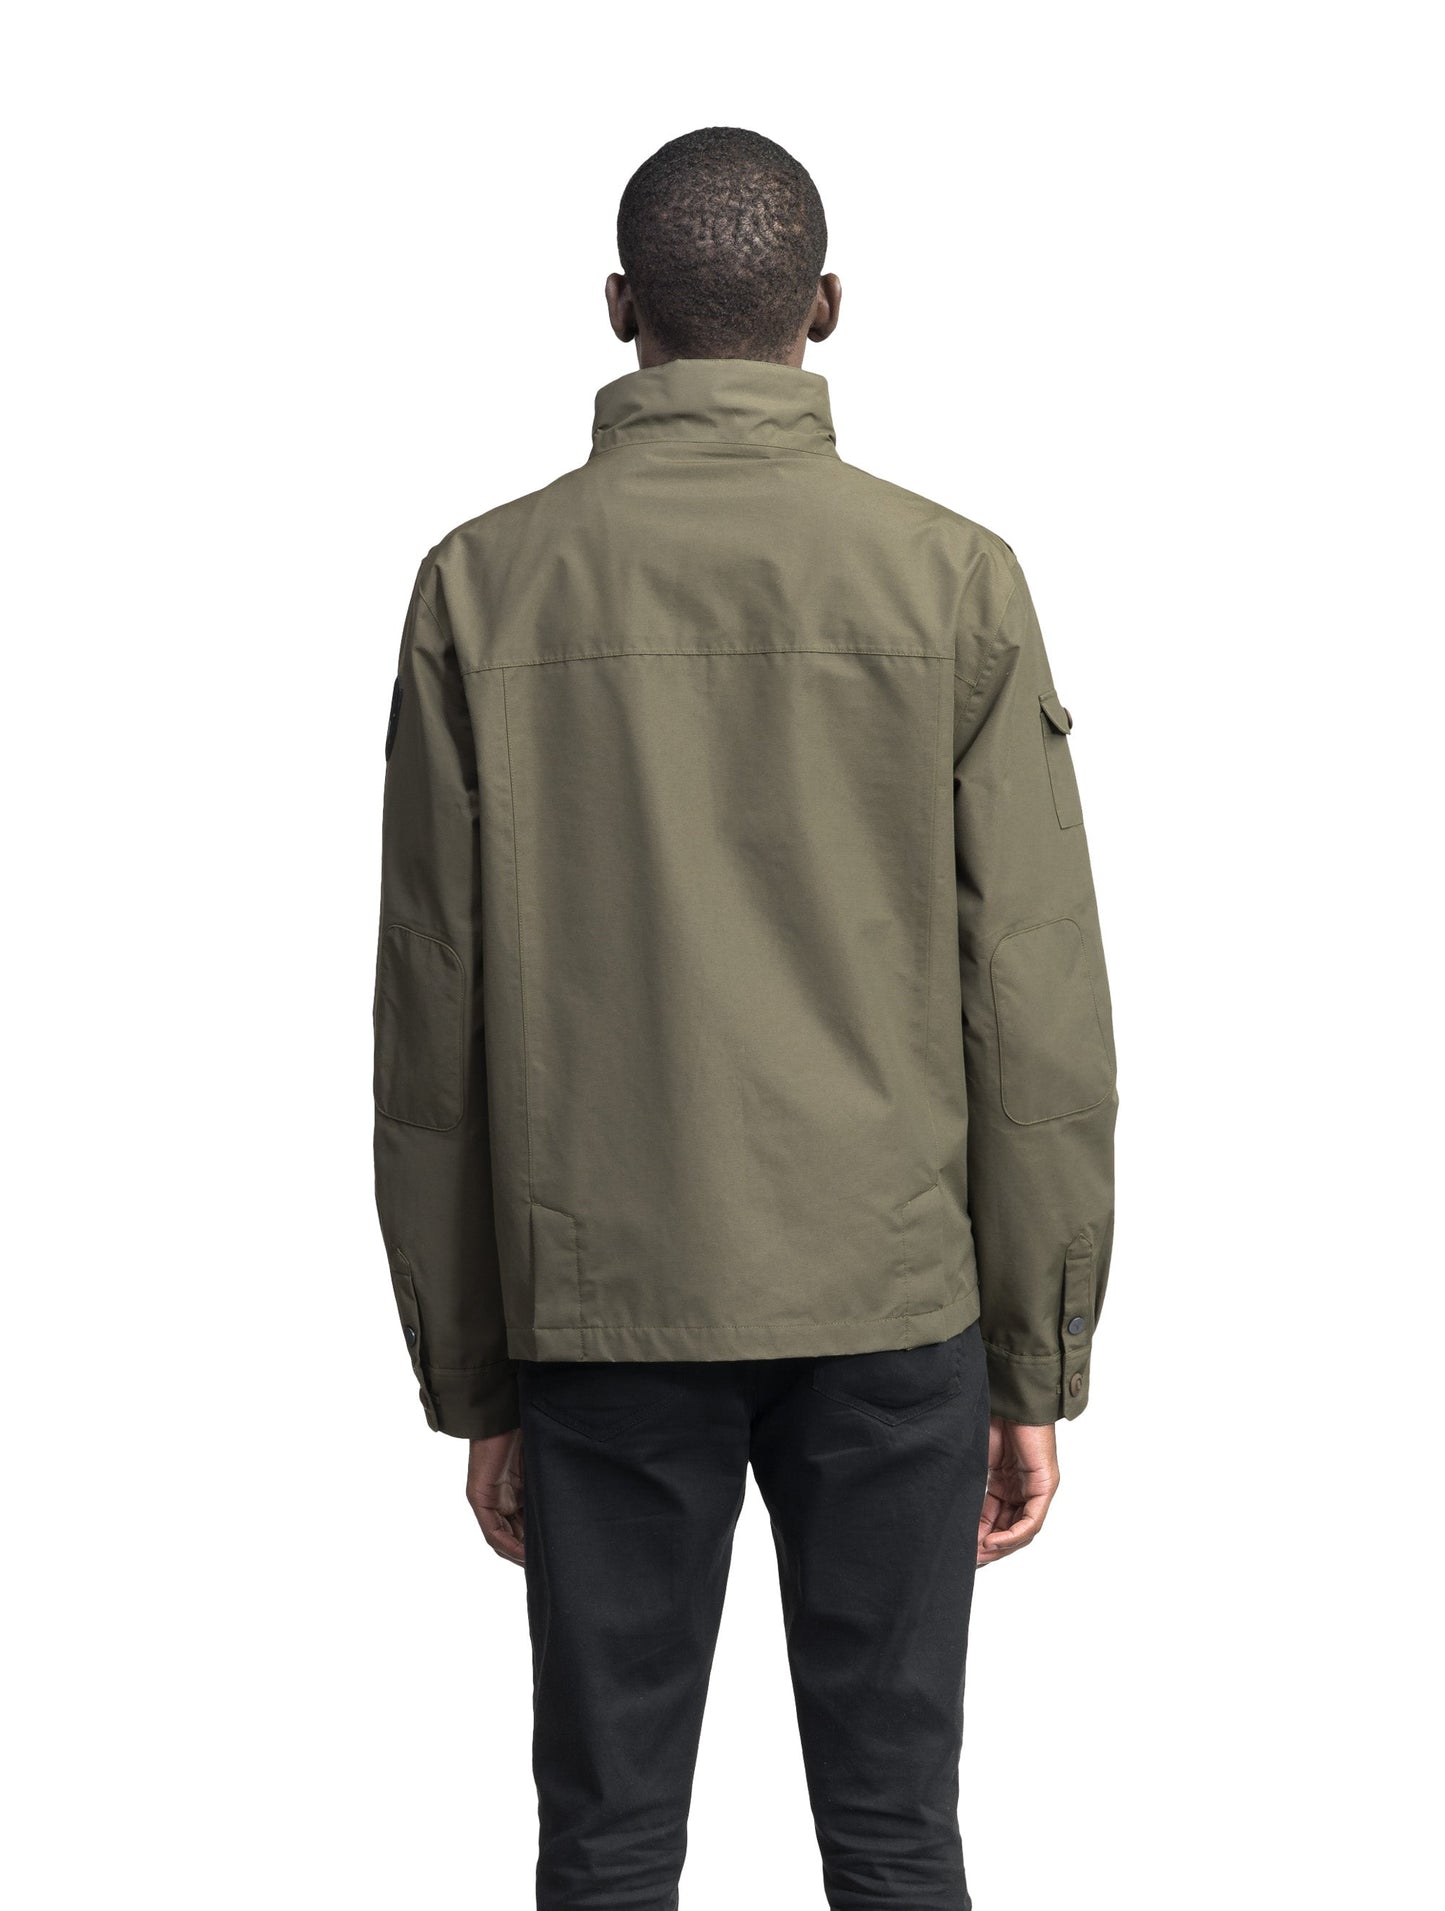 Men's waist length military style jacket in Fatigue